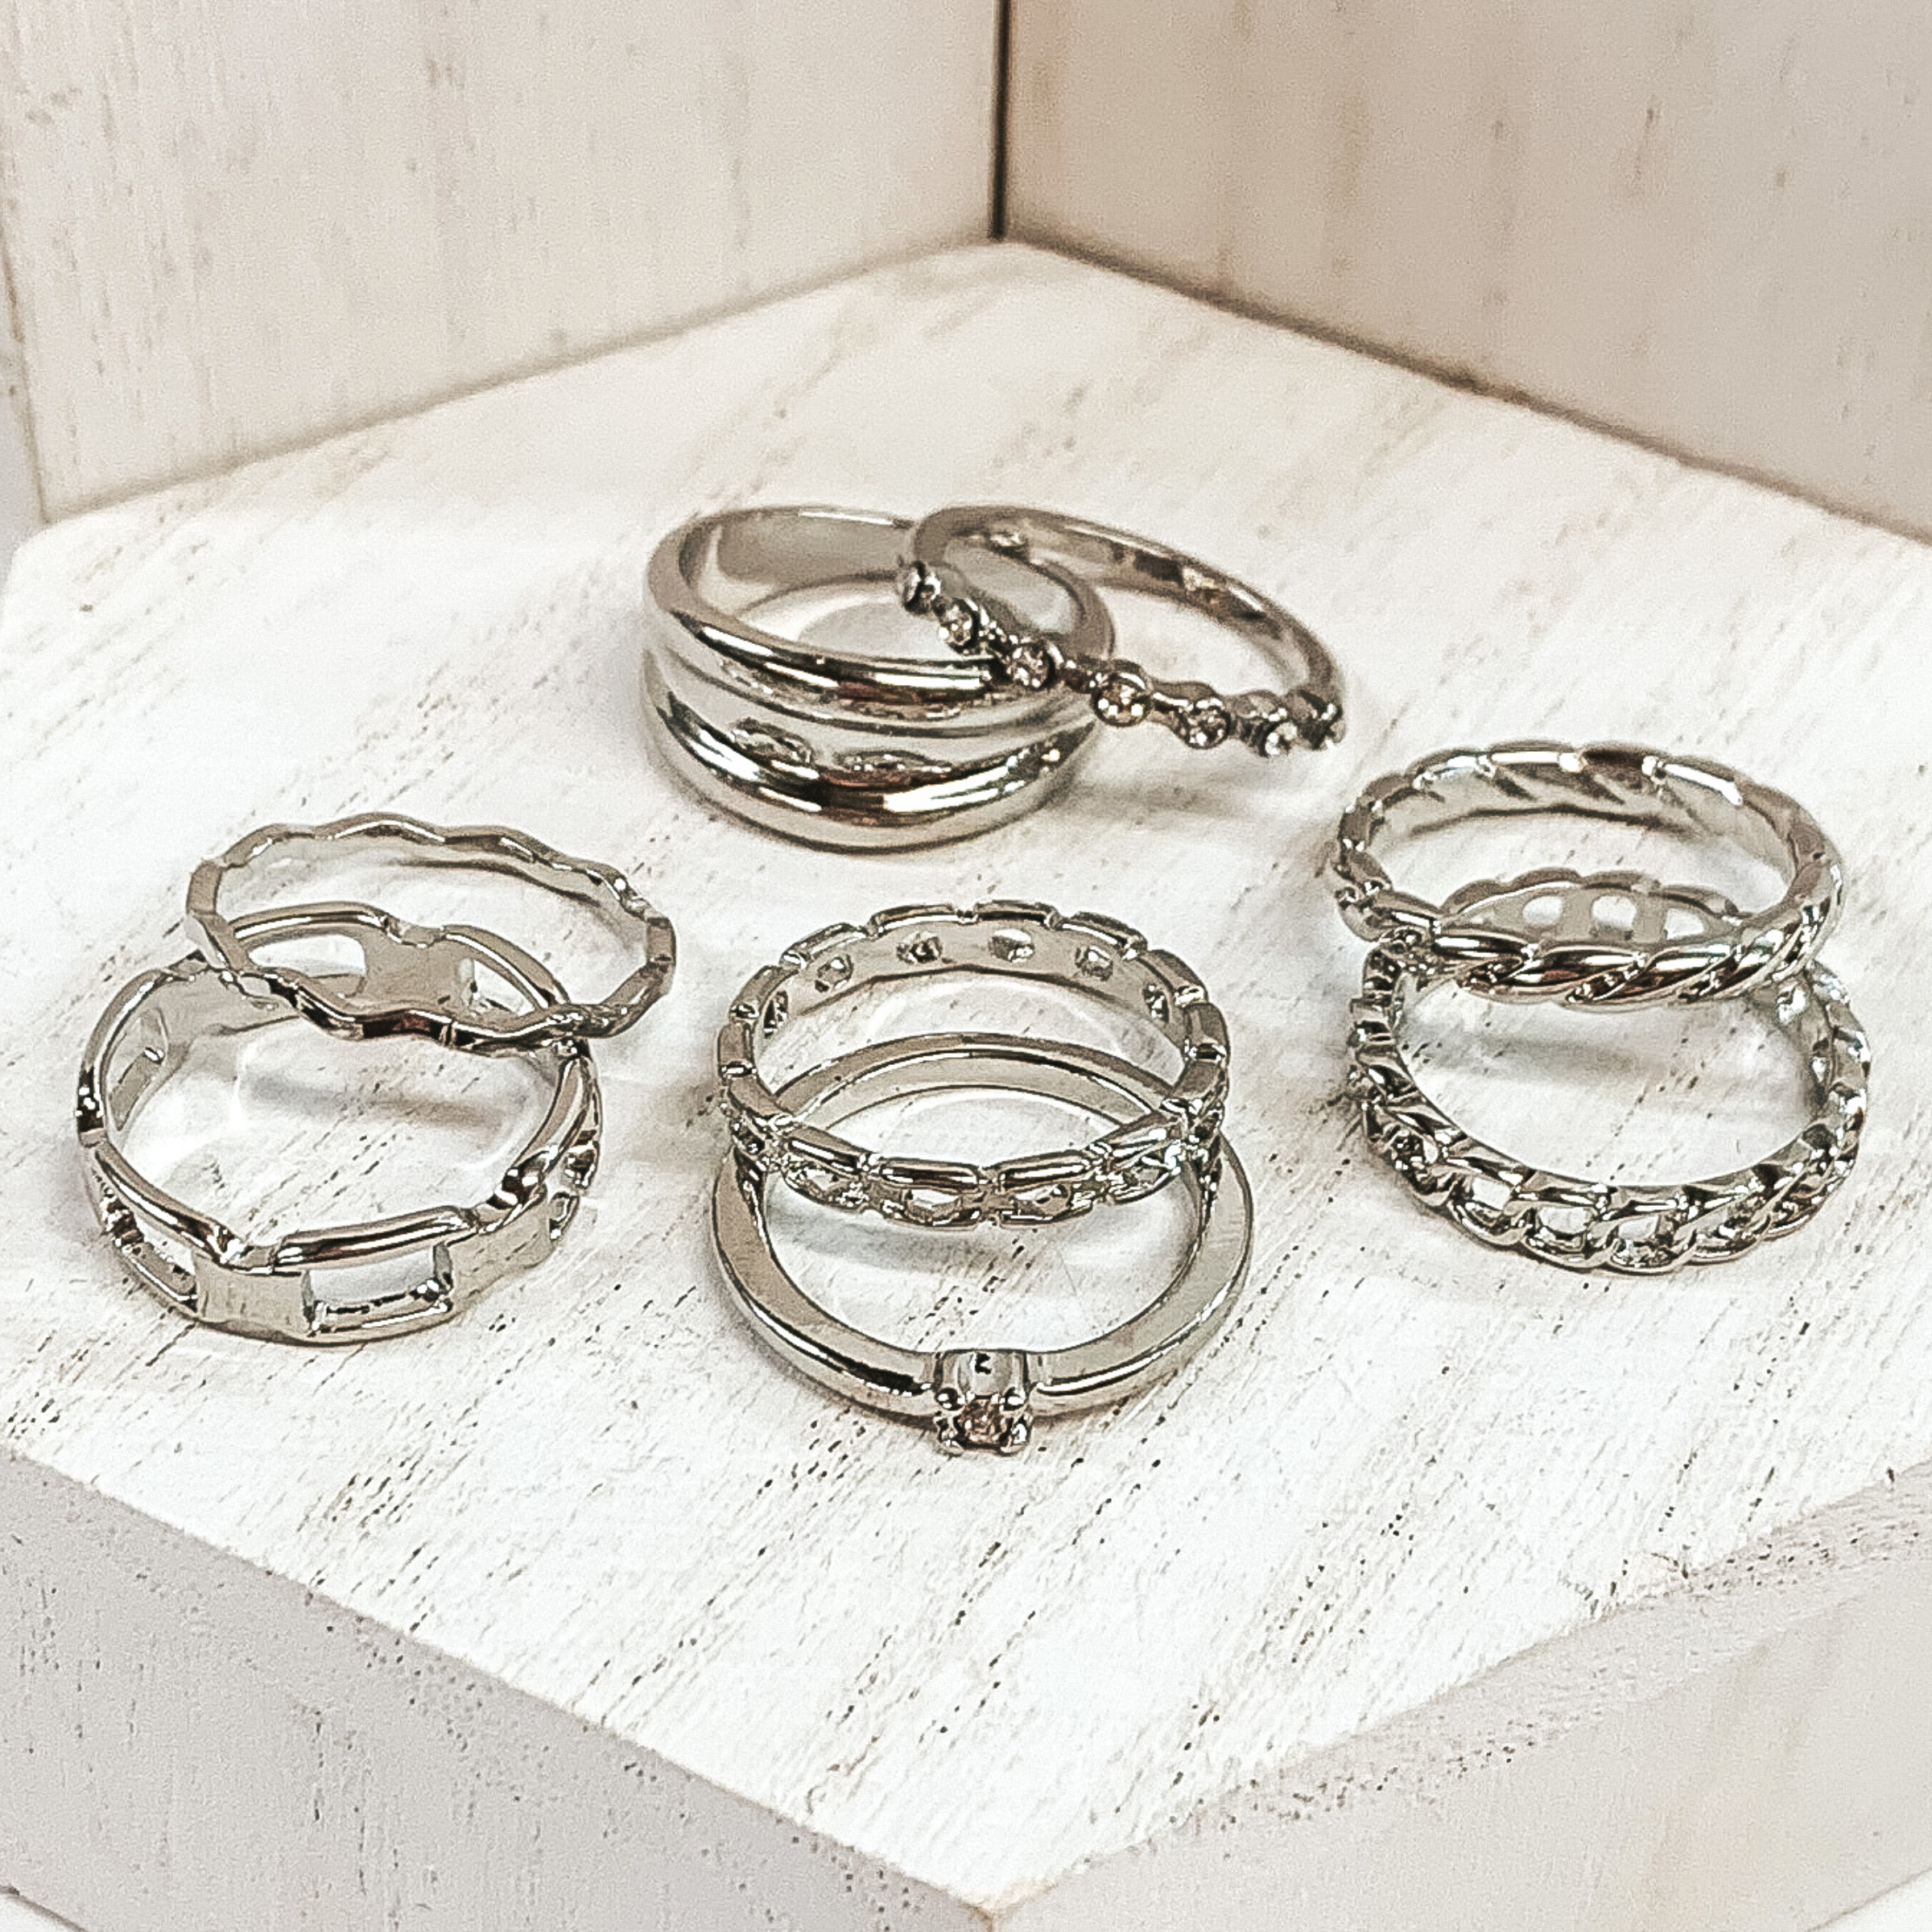 This is a set of eight silver rings. Two of the rings include clear crystals, three rings are different types of chains, one twisted ring, one wavy rings, and one thicker banded ring. This set is pictured on a white background.